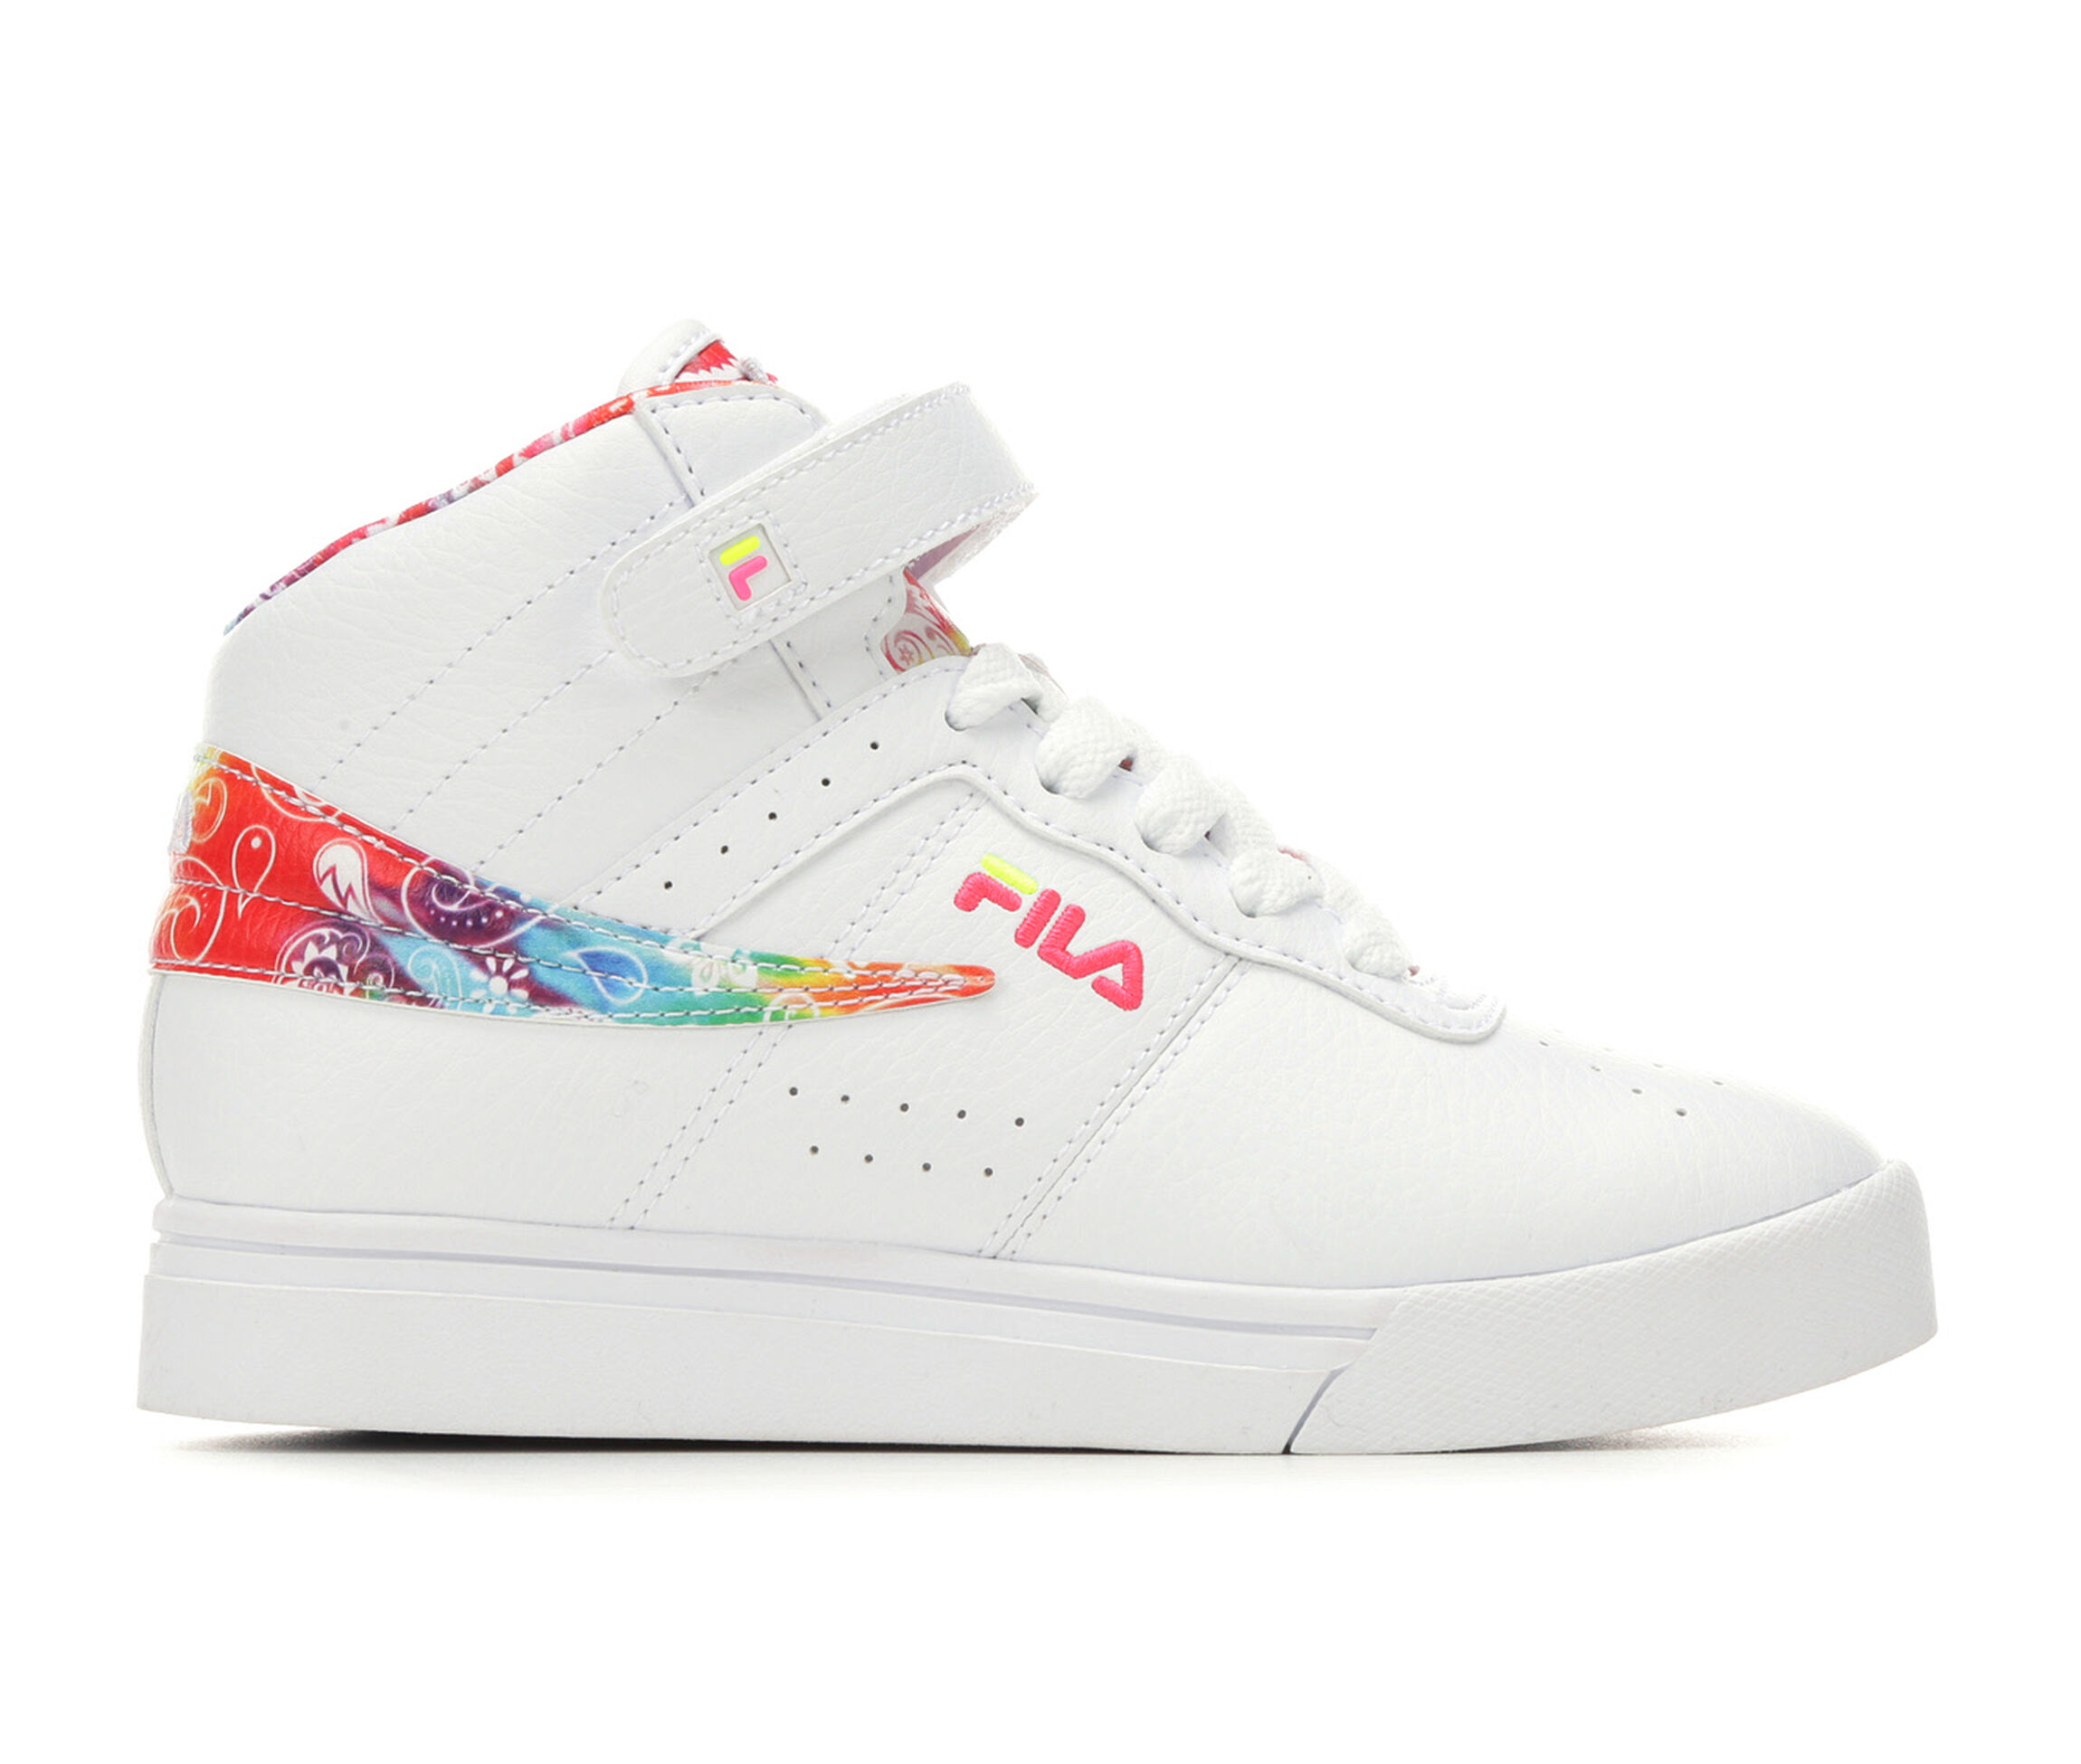 Kids' Fila Shoes | Boys' & Girls' Sneakers and Slides